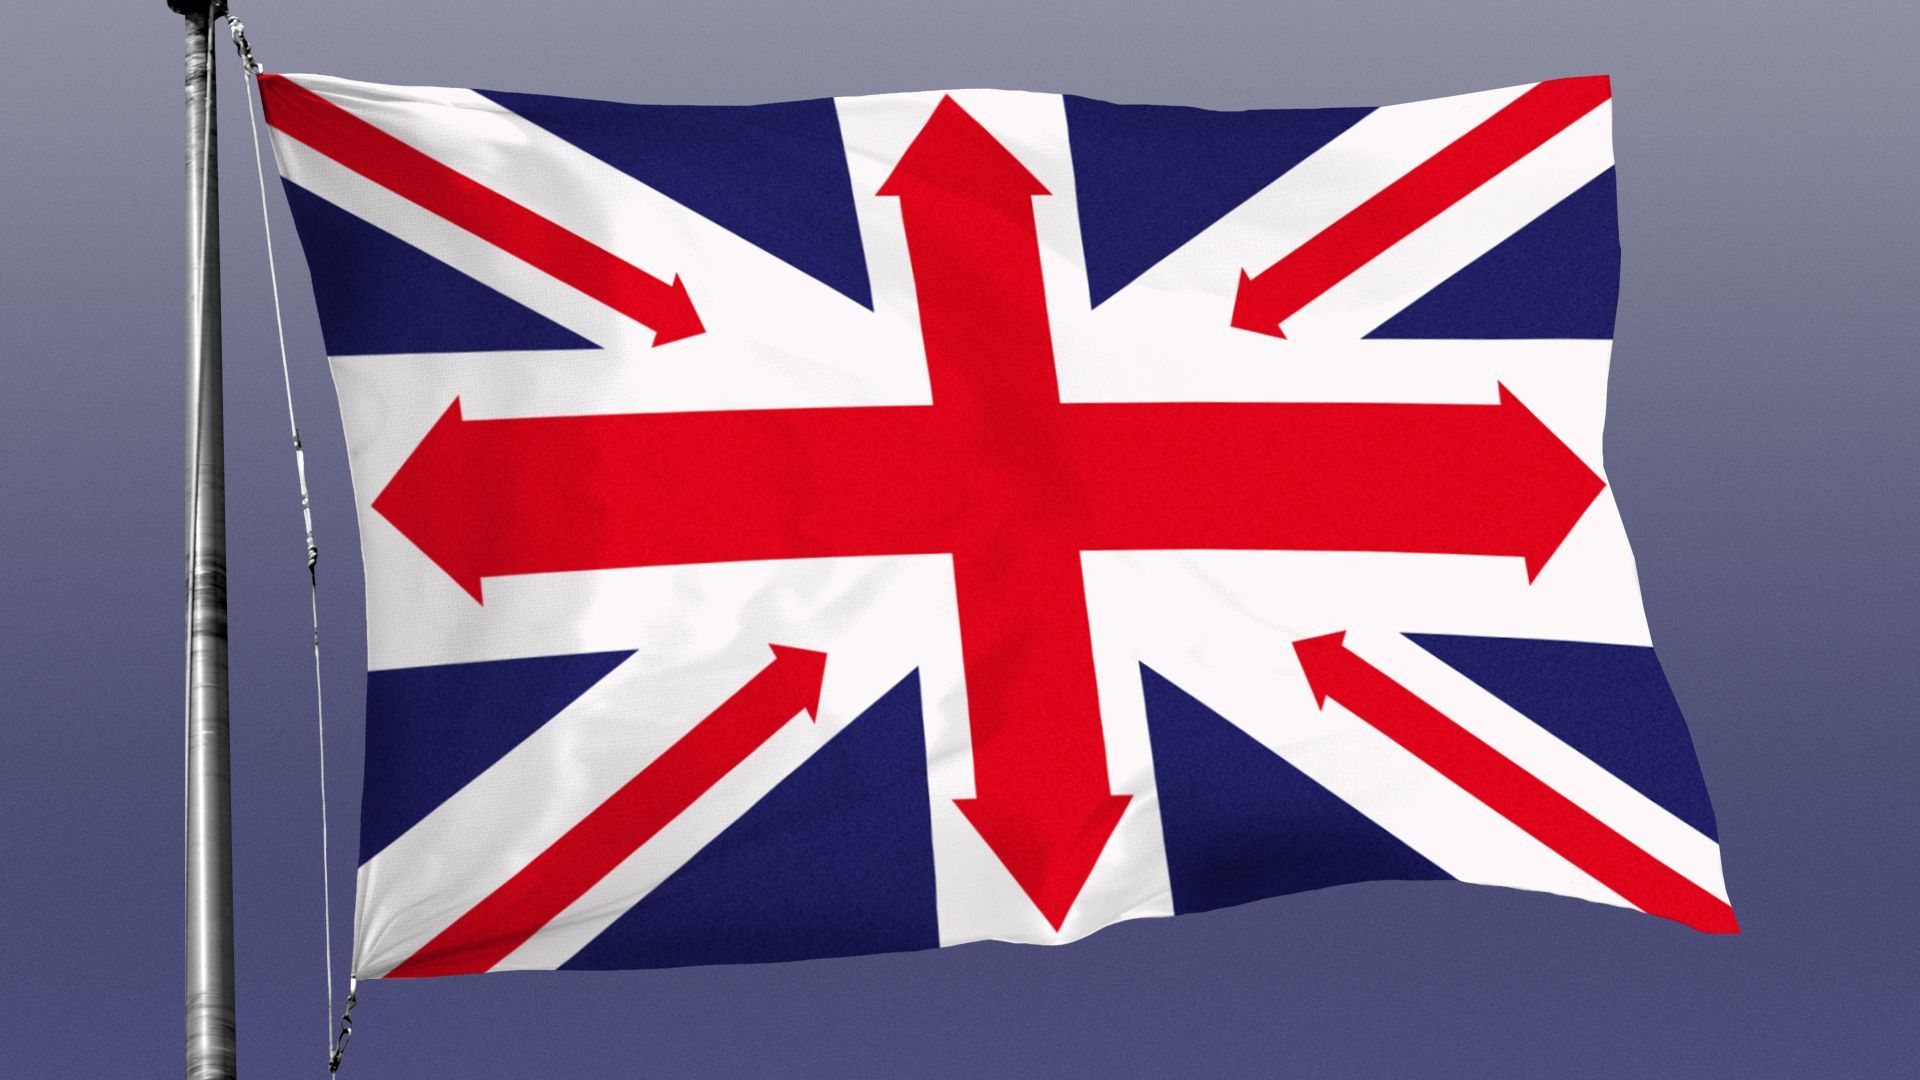 Illustration of the Union Jack flag with arrows in place of the stripes